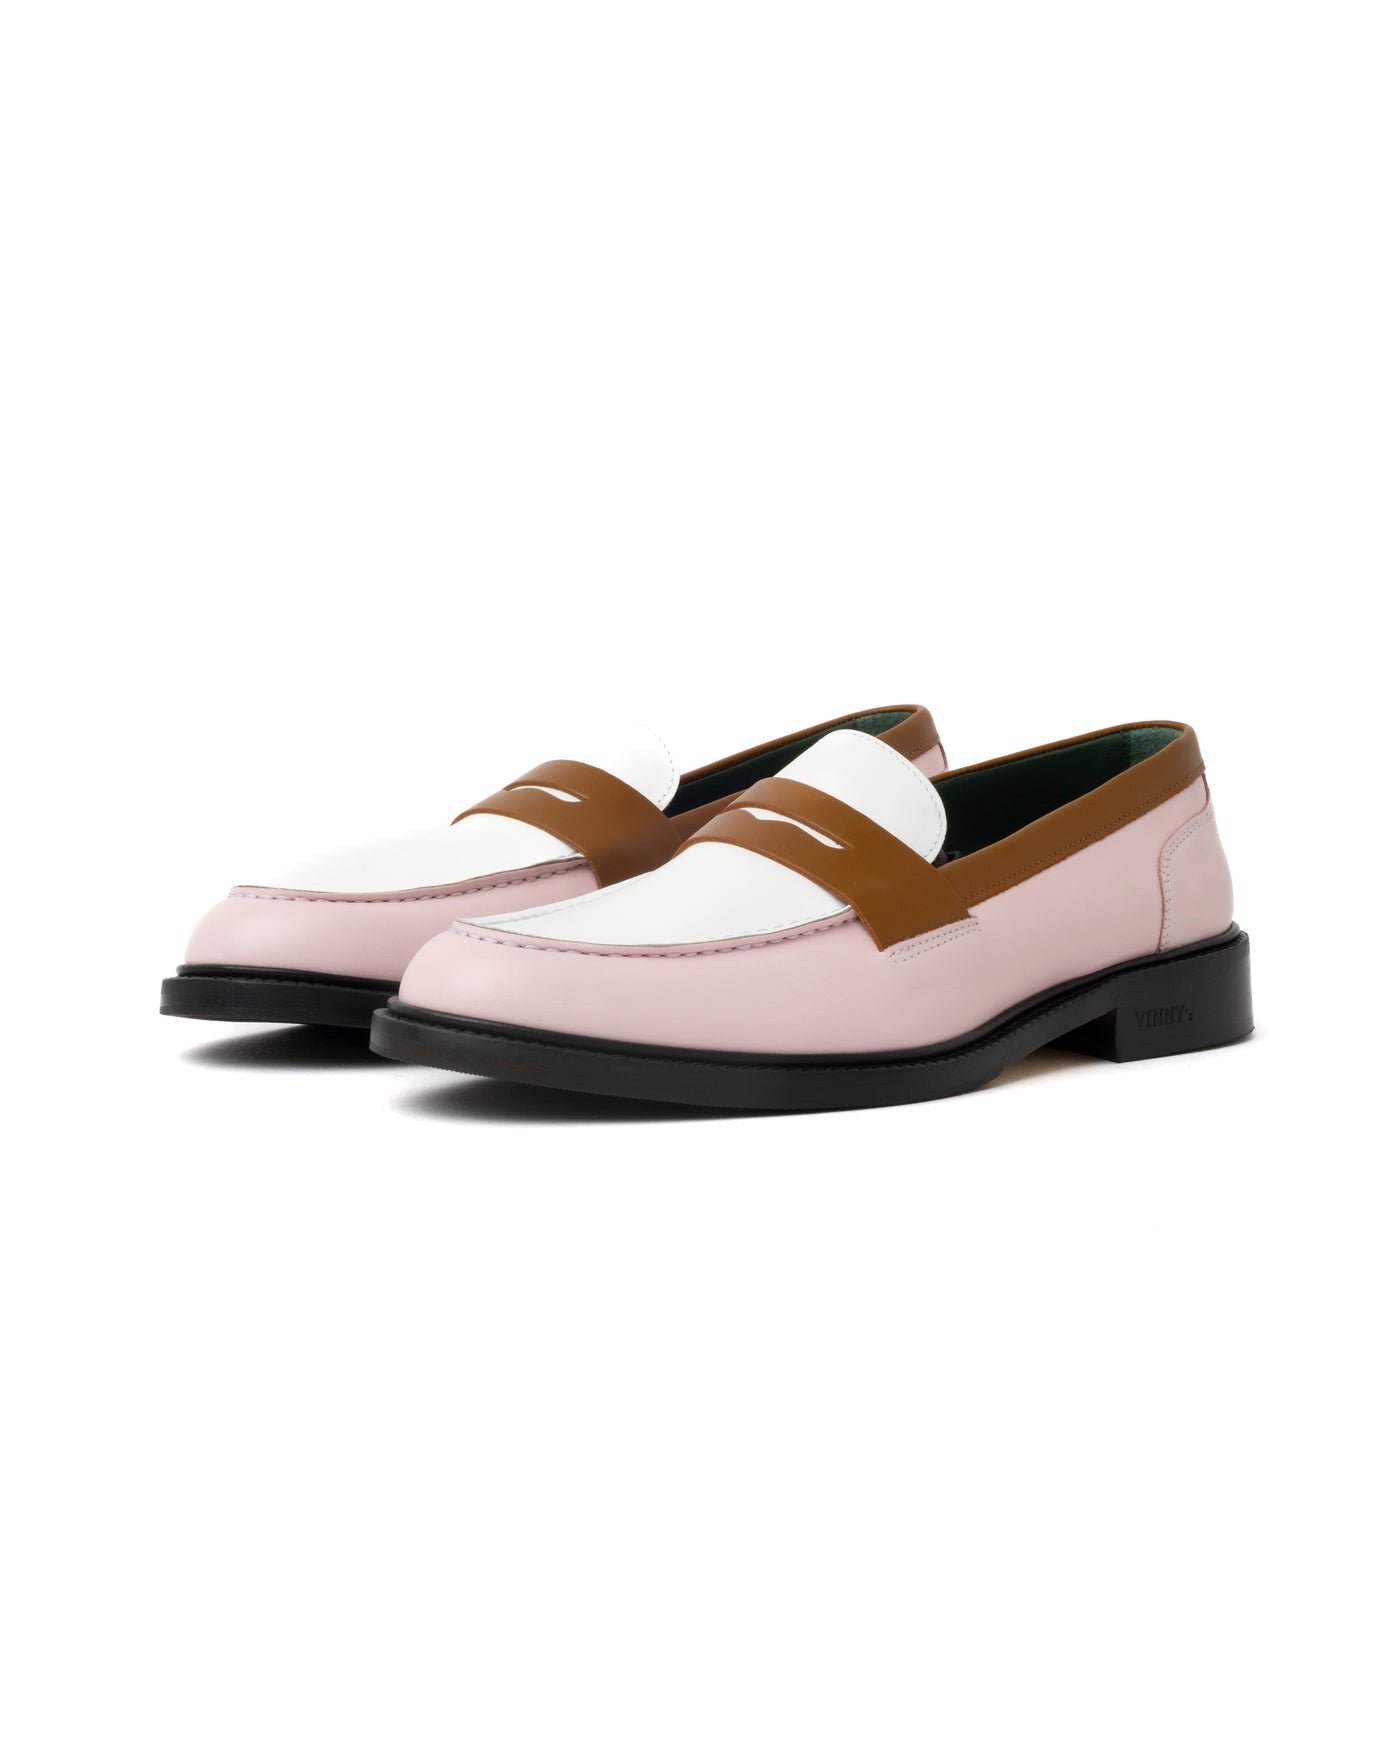 Vinny's Townee Tri-Tone Penny Loafer Leather Pink